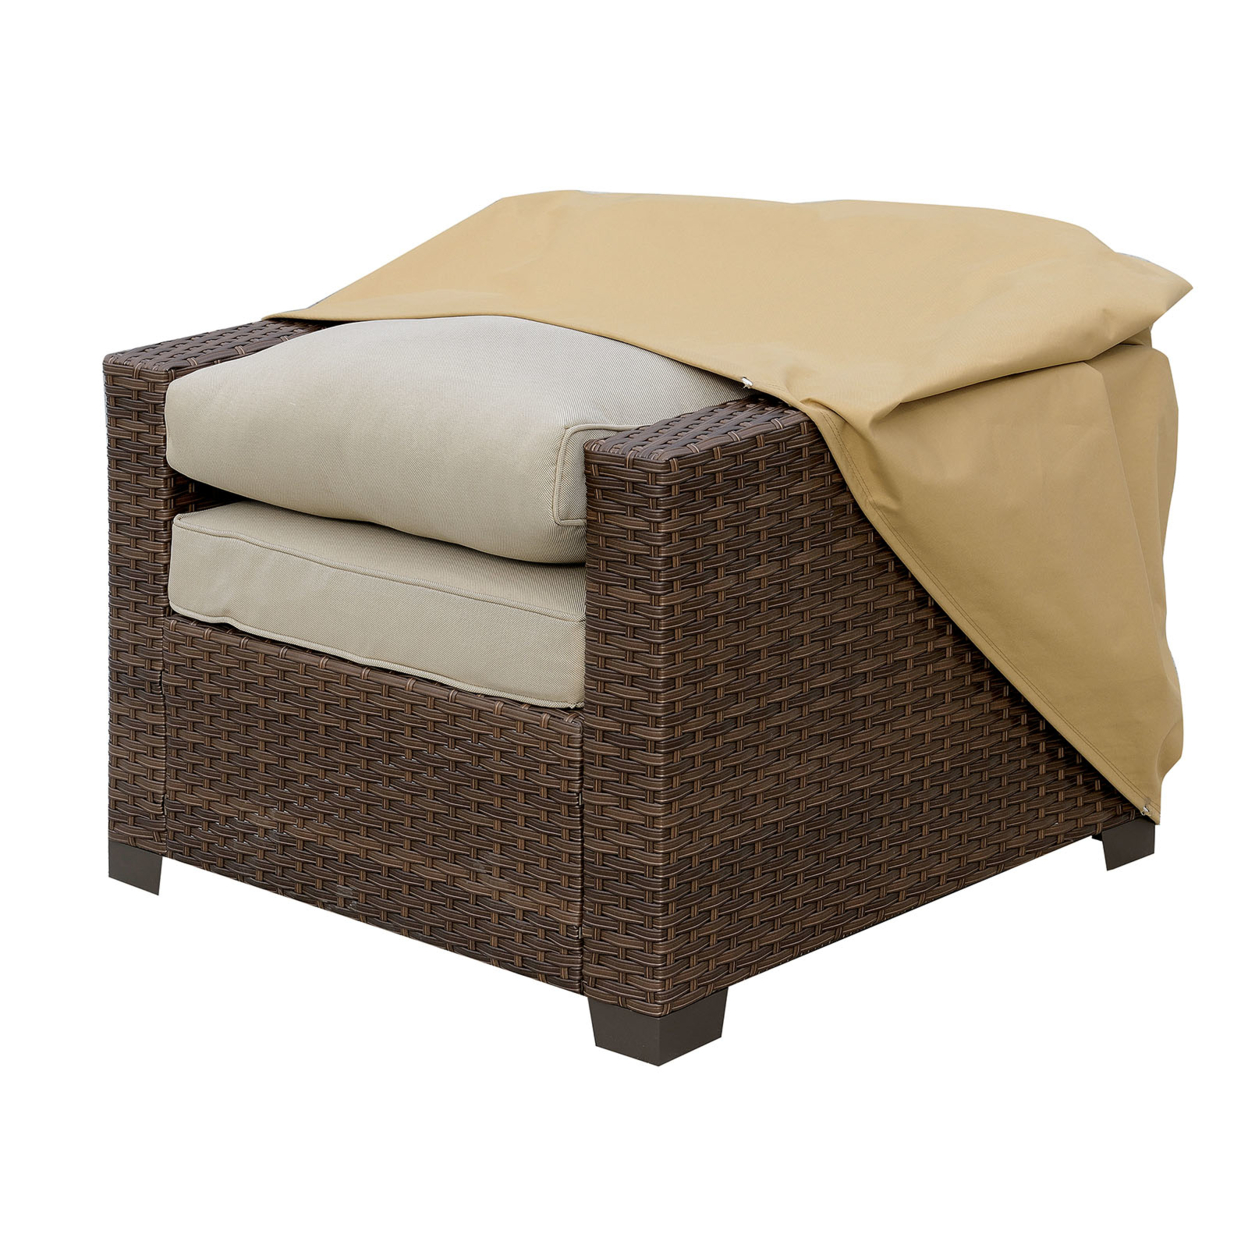 Fabric Dust Cover For Outdoor Chairs, Medium, Light Brown- Saltoro Sherpi